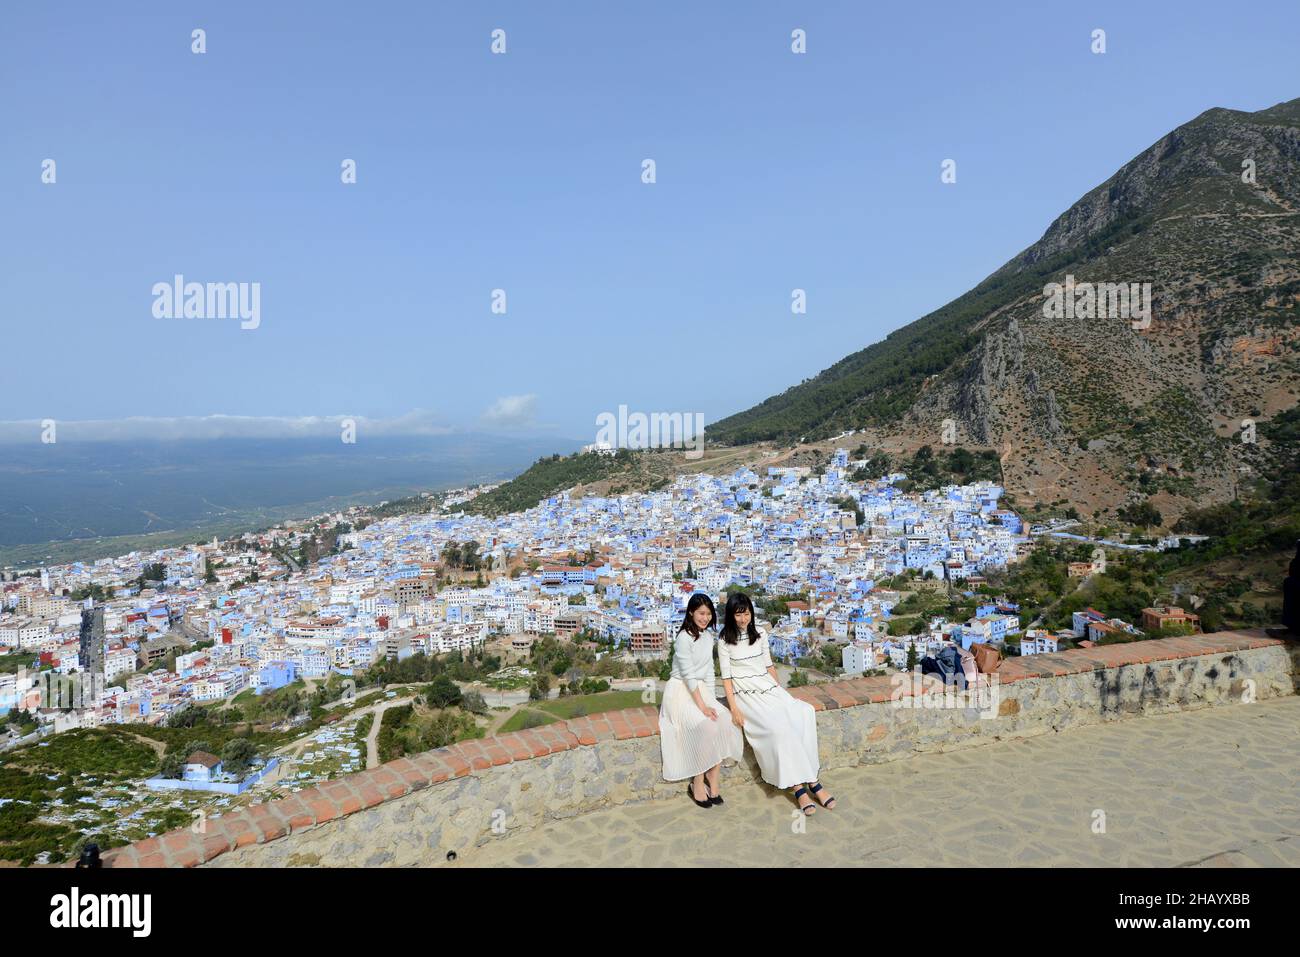 Asian tourist posing for a shot with the view of the Blue City of Chefchouen in the Rif mountains in Morocco. Stock Photo